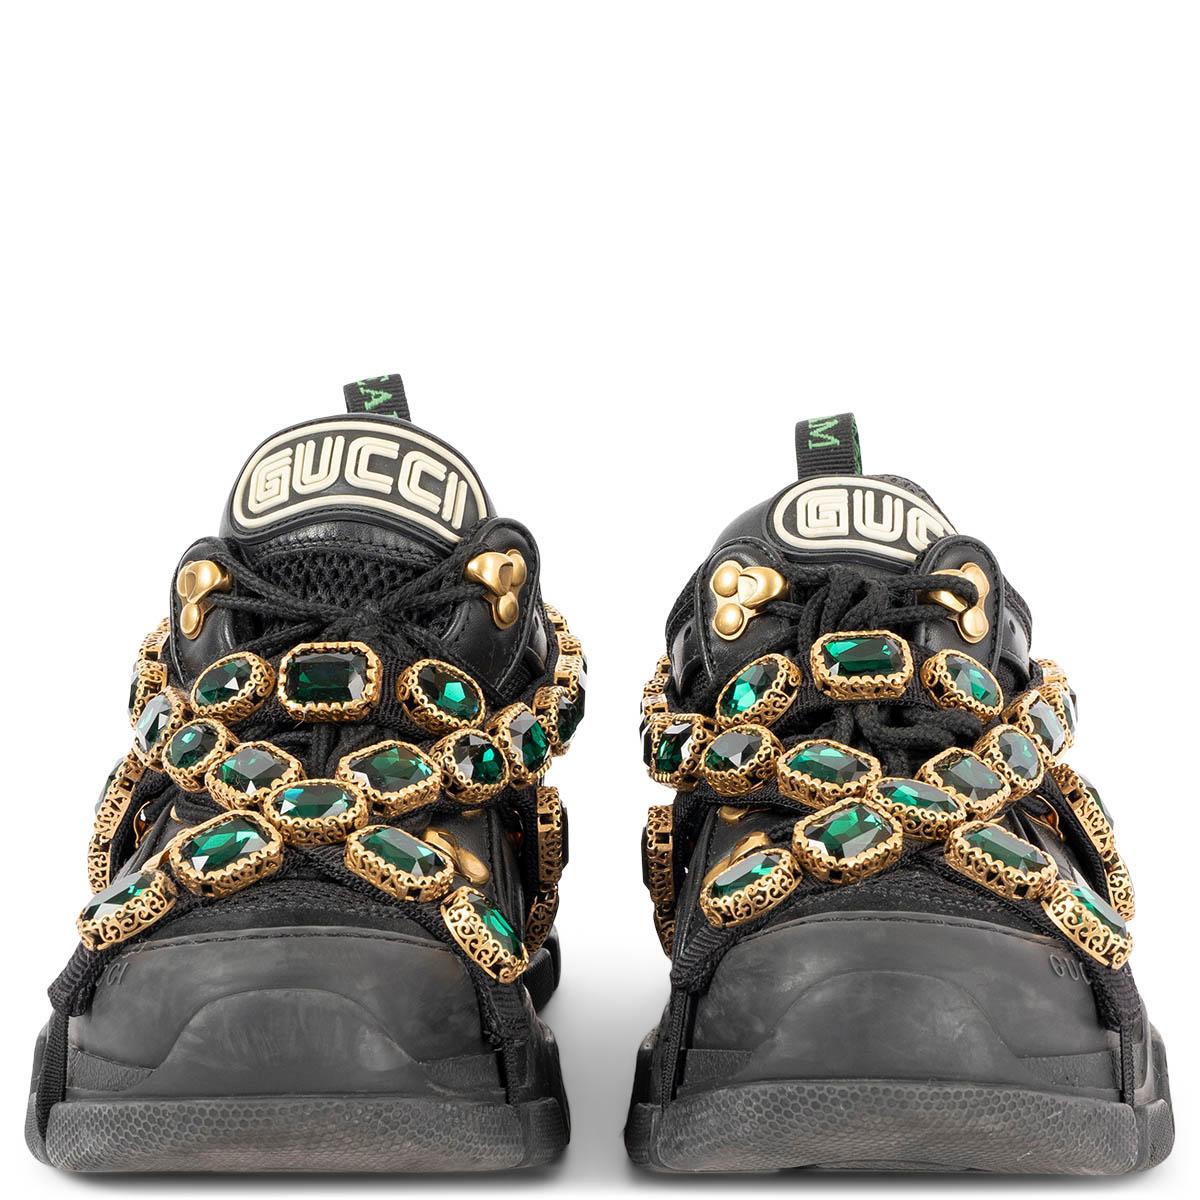 100% authentic Gucci Flashtrek sneakers in black leather, suede and technical fabric with rubber lug sole from the fall/winter 2018 collection runway. Sparkling green crystals are embroidered onto a removable elastic strap, wrapping around these